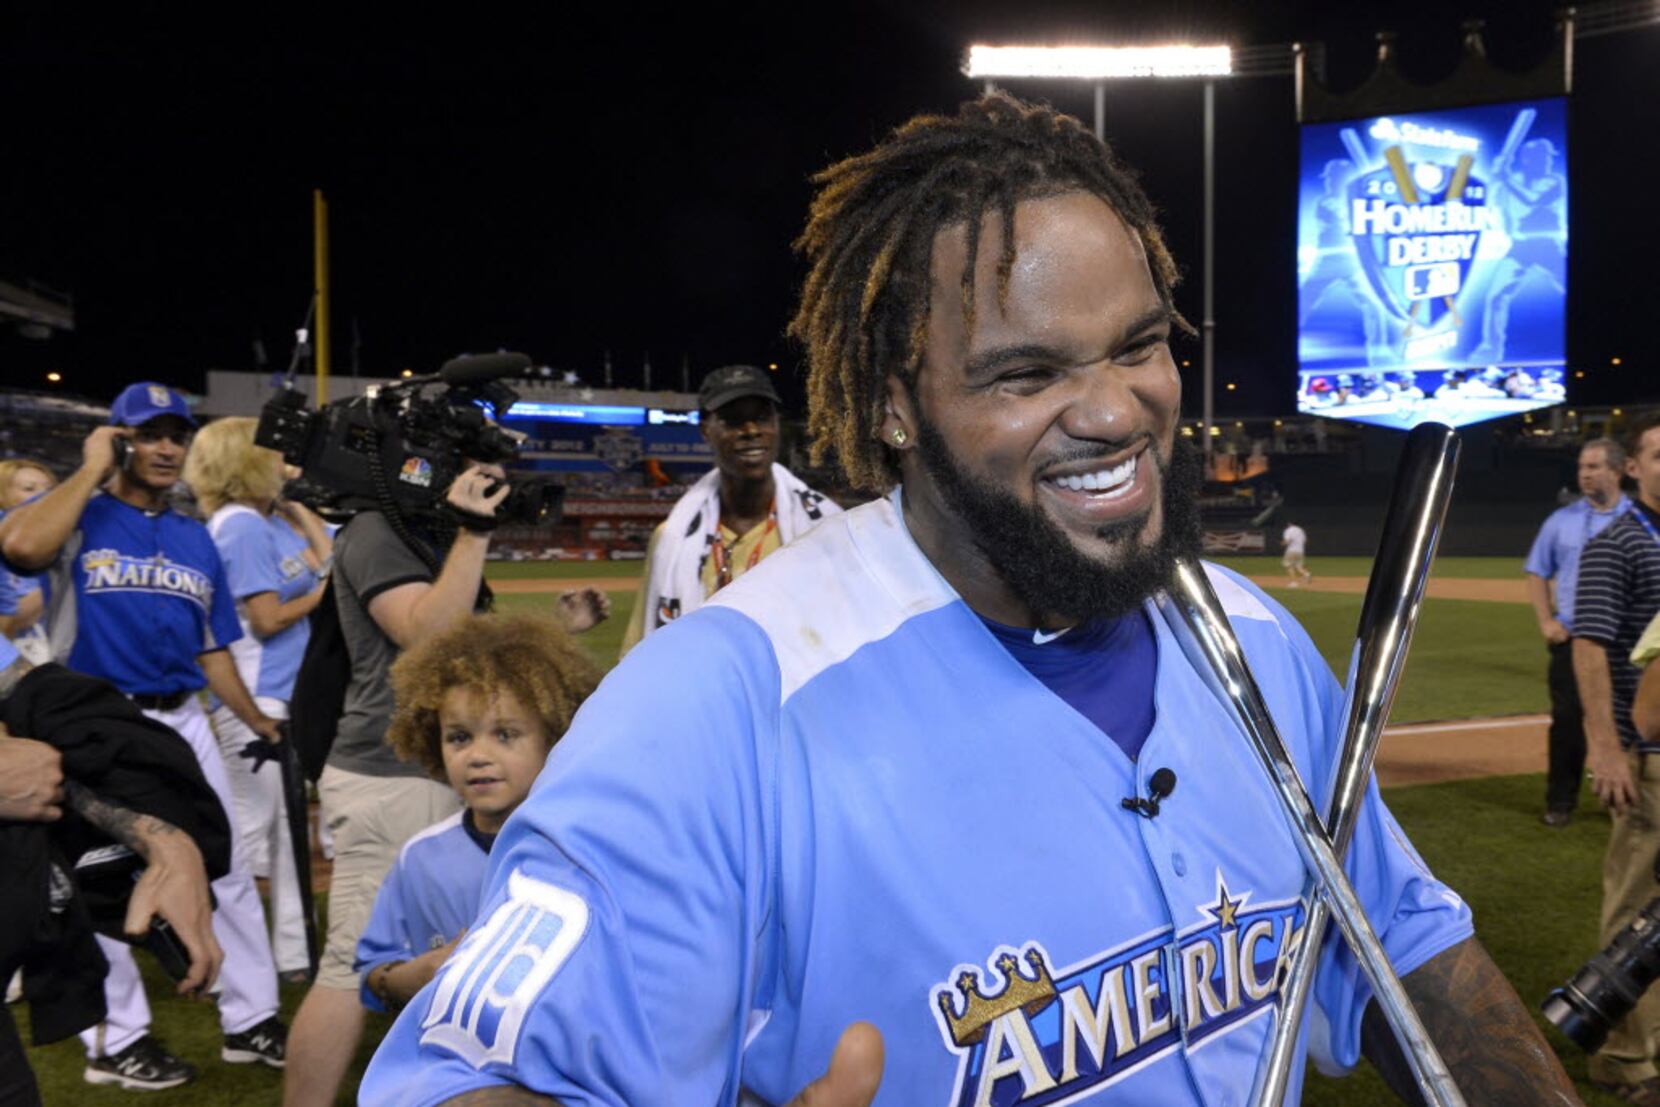 Will Prince Fielder flop like Josh Hamilton? There are similarities